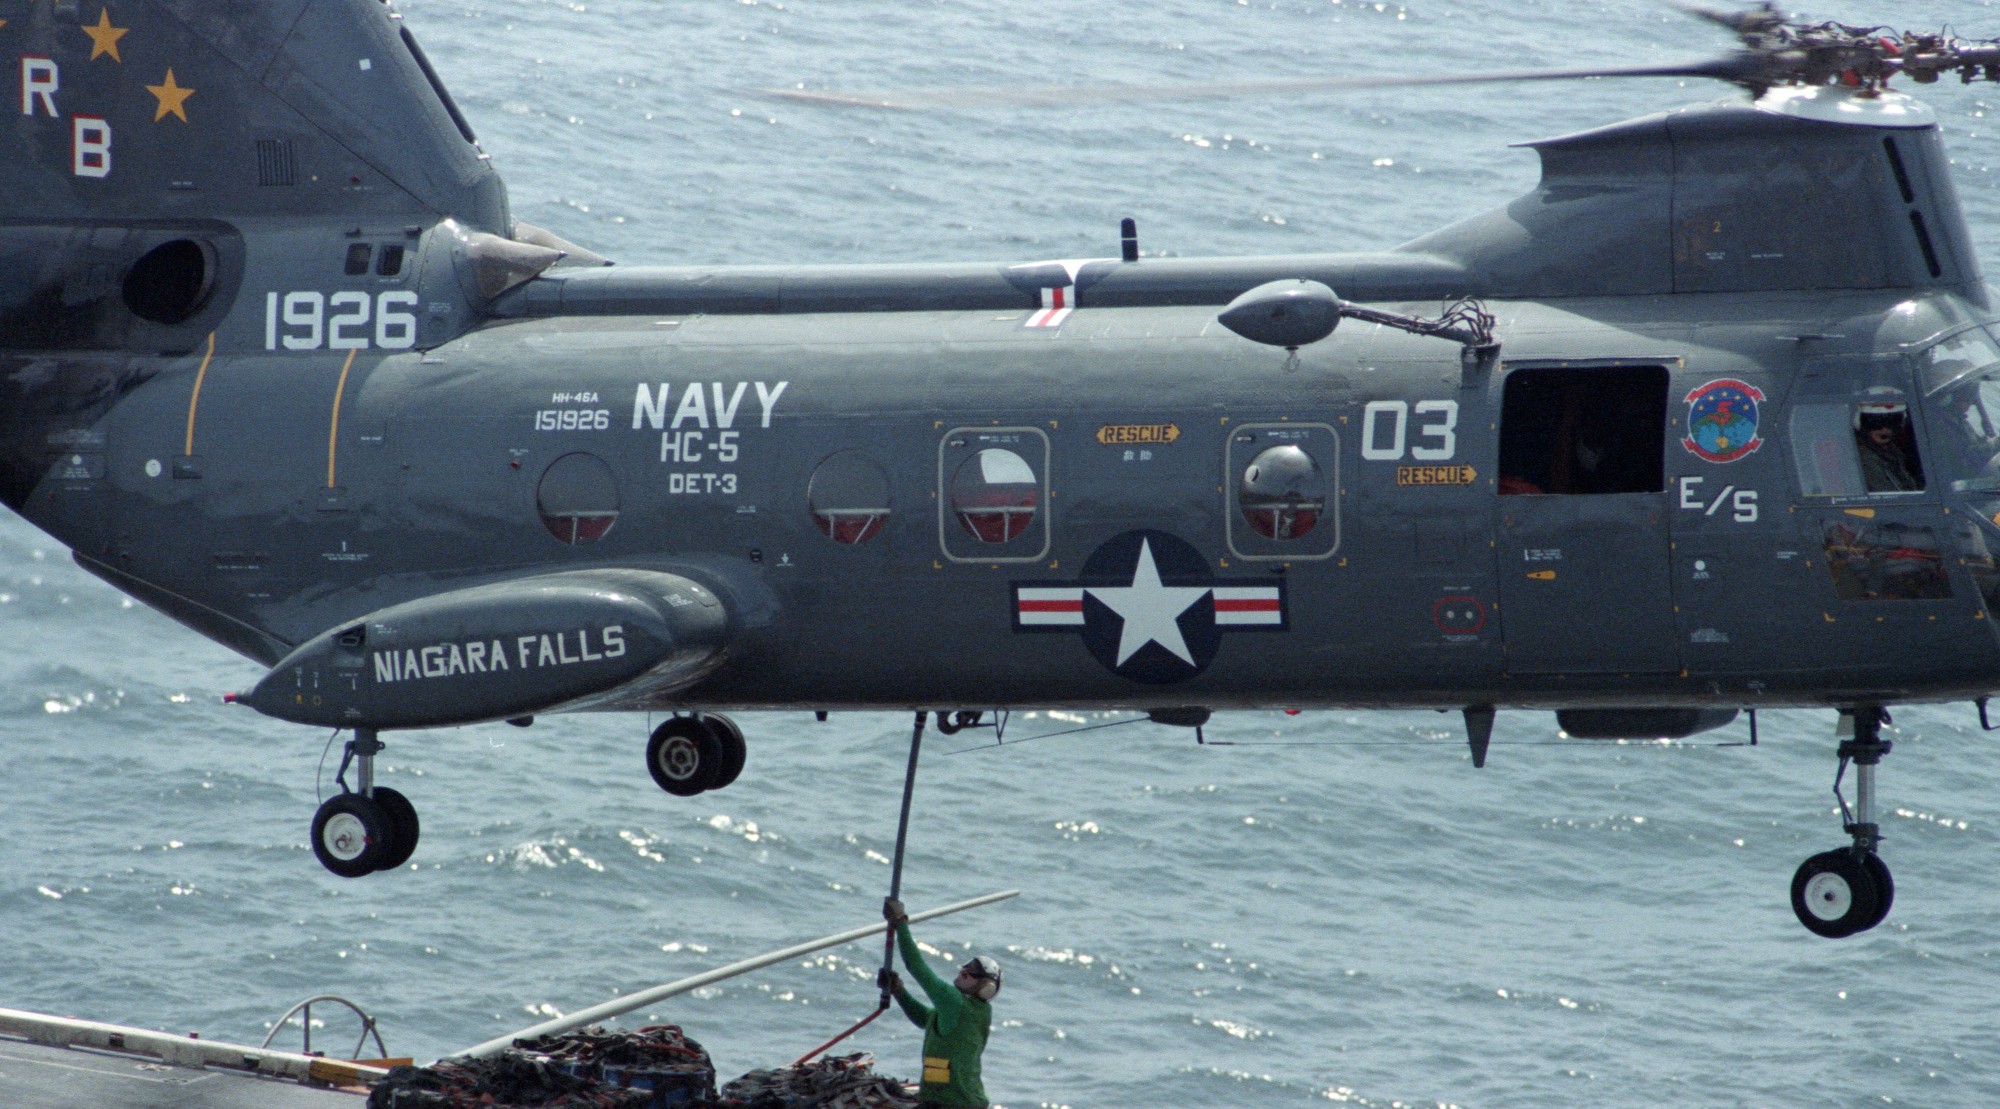 hc-5 providers helicopter combat support squadron navy hh-46a sea knight 60